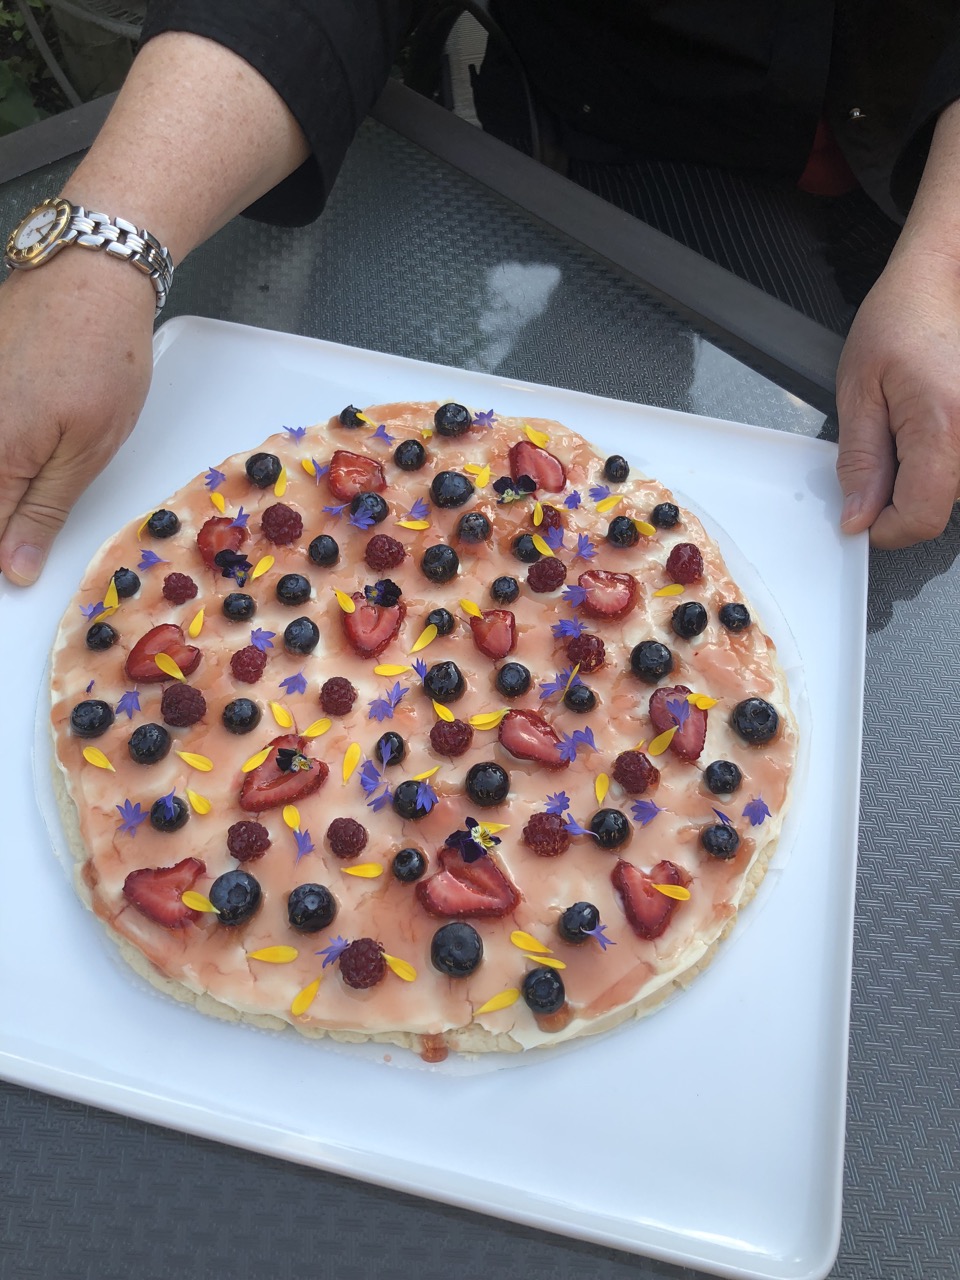 Two hands holding a square white platter holding a glazed fruit pizza that has randomly placed strawberries, raspberries and blueberries. Finished with a sprinkling of blue and yellow. edible flower petals.